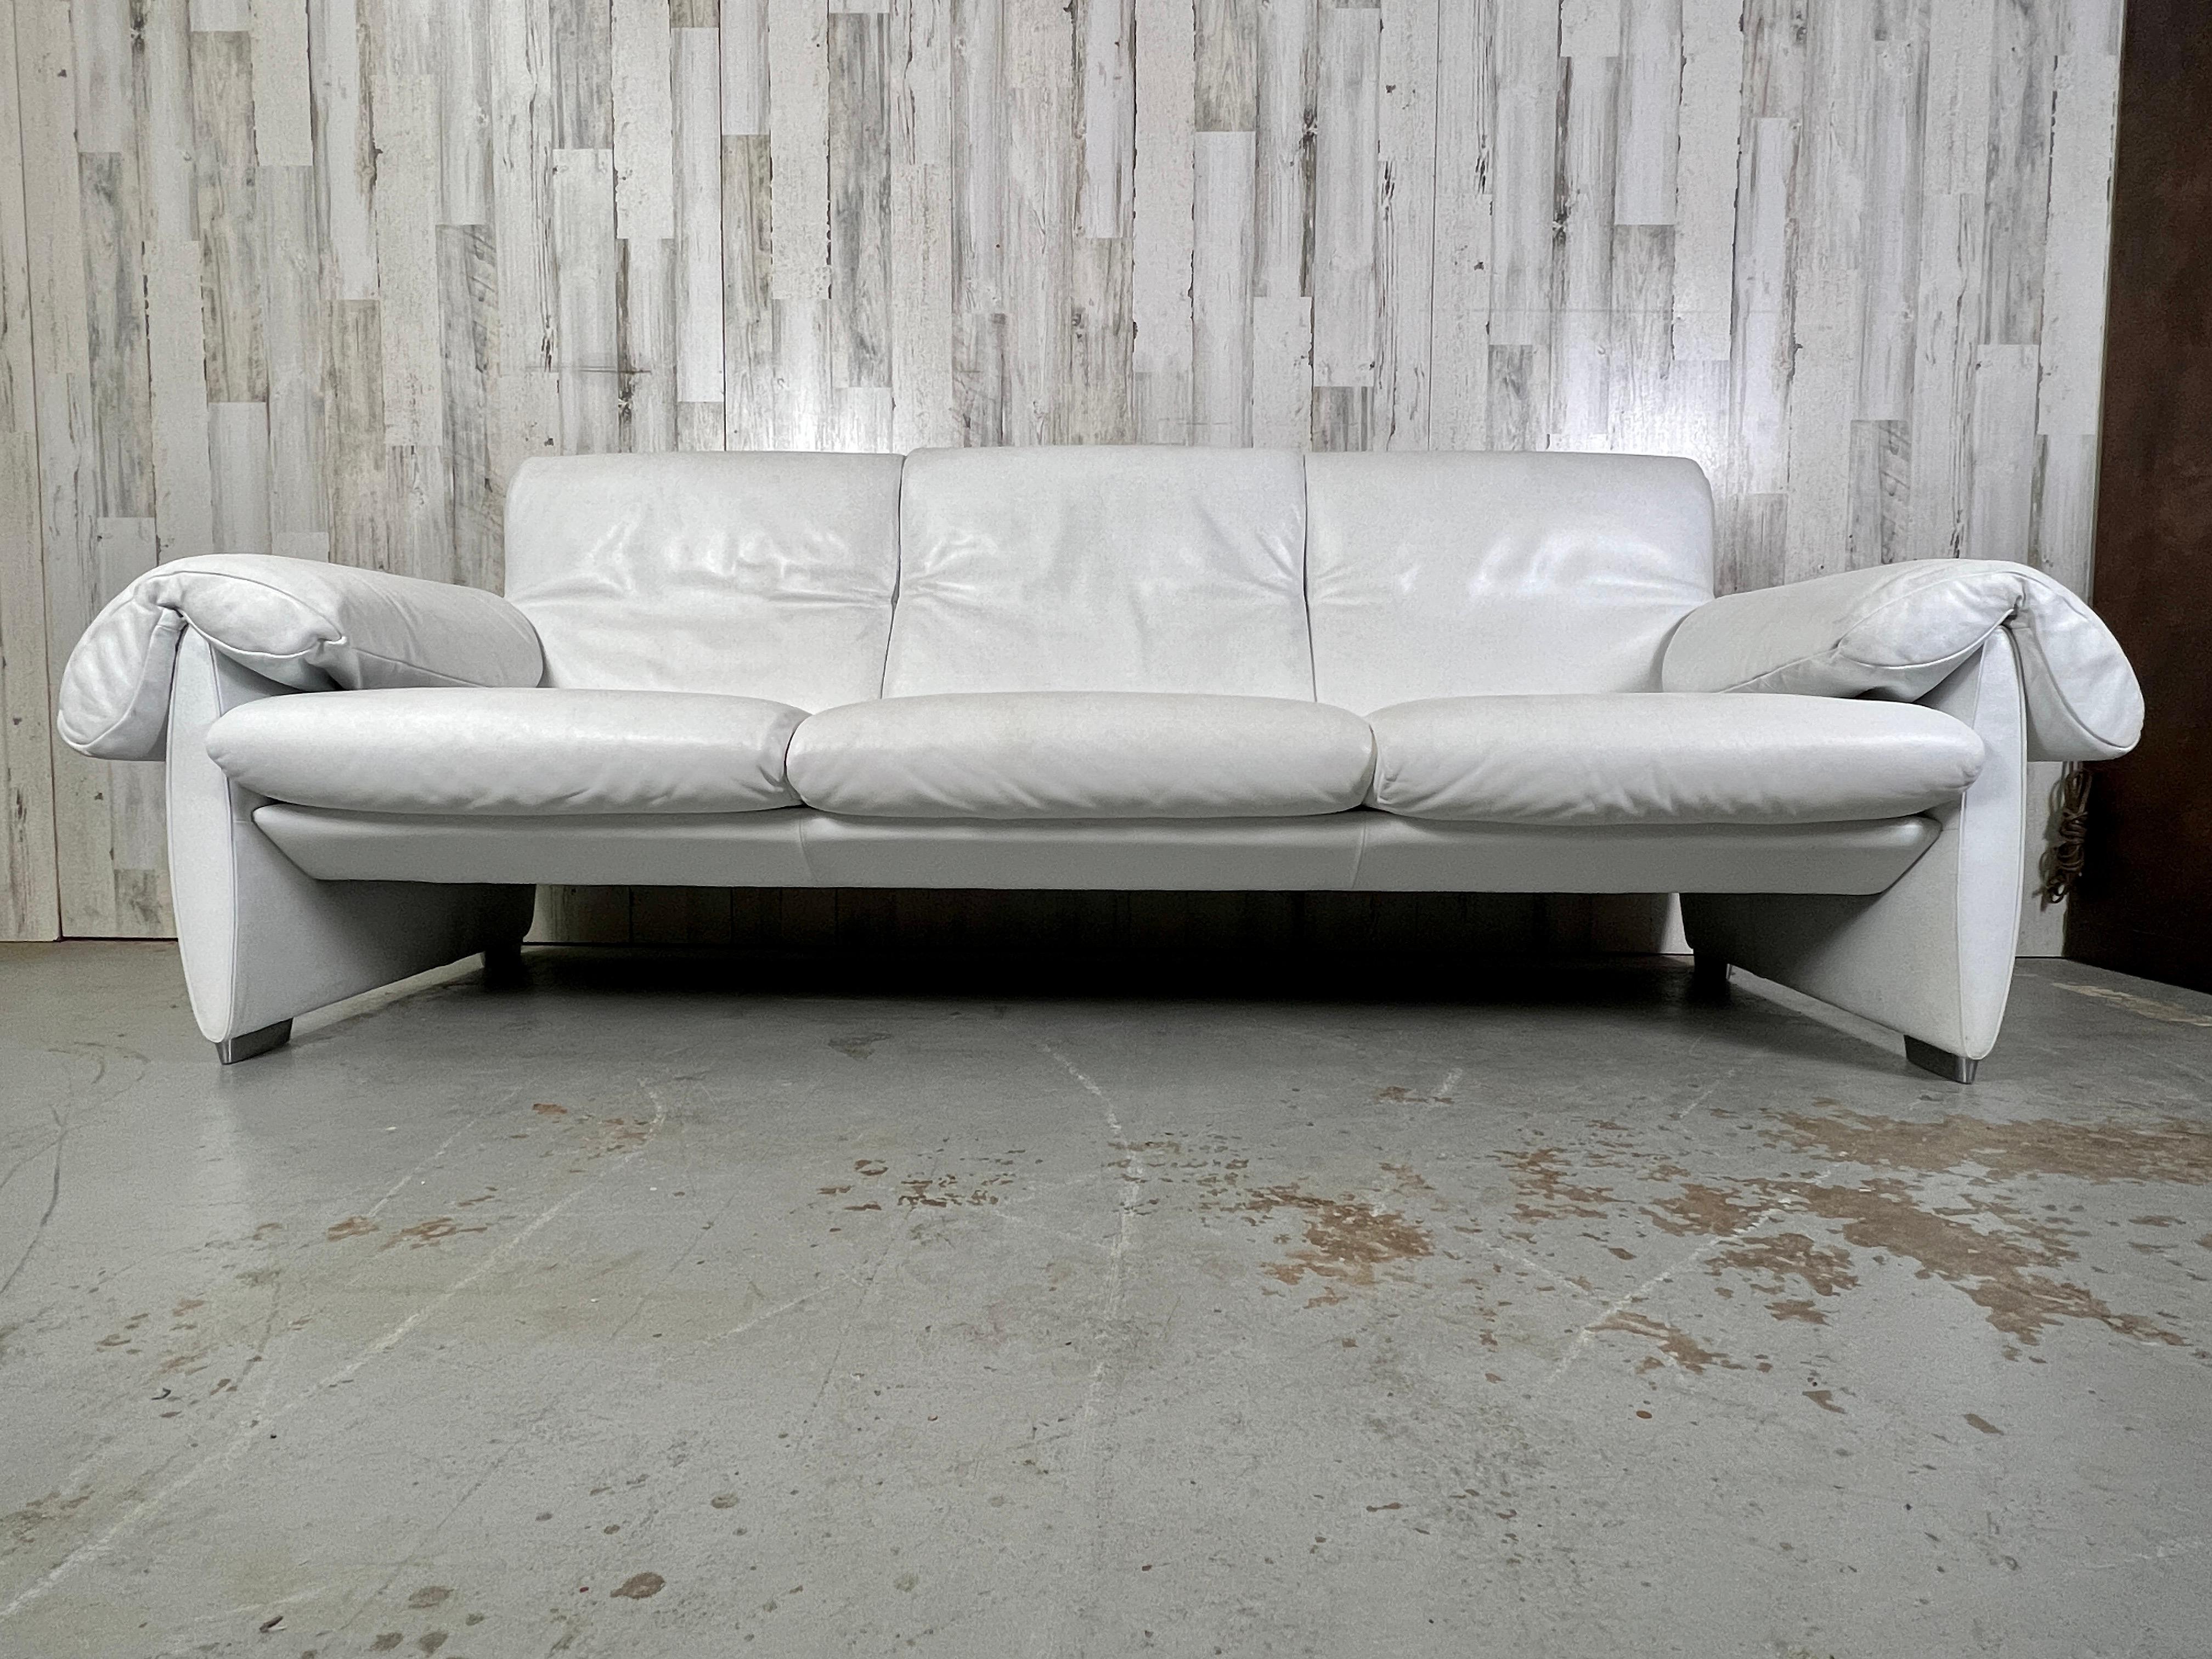 DS 10 three seat sofa by De Sede of Switzerland. Top quality leather with adjustable head rest and very comfortable.